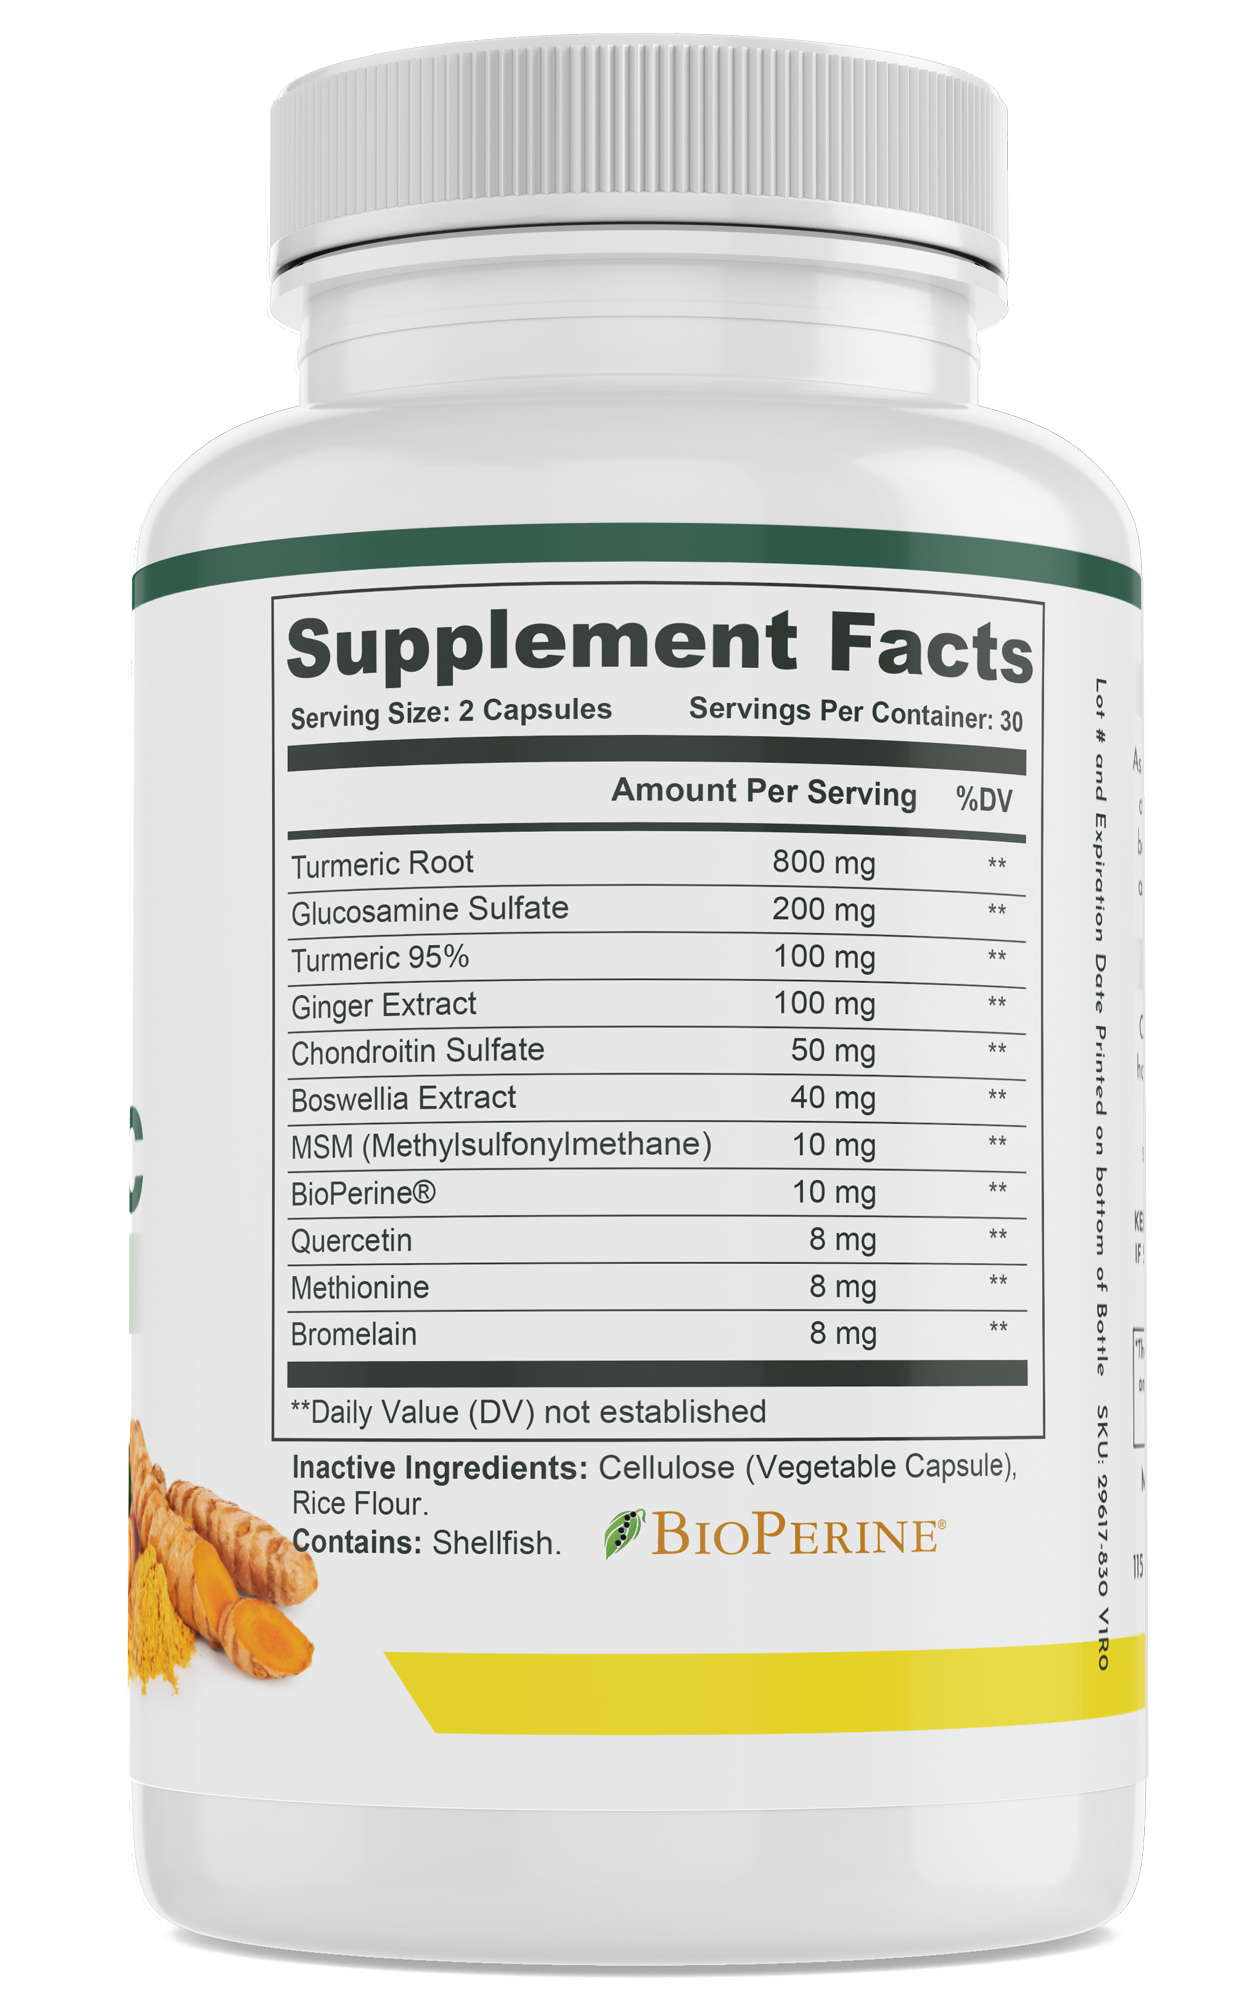 Premium curcumin supplement known for its powerful antioxidant and anti-inflammatory benefits.